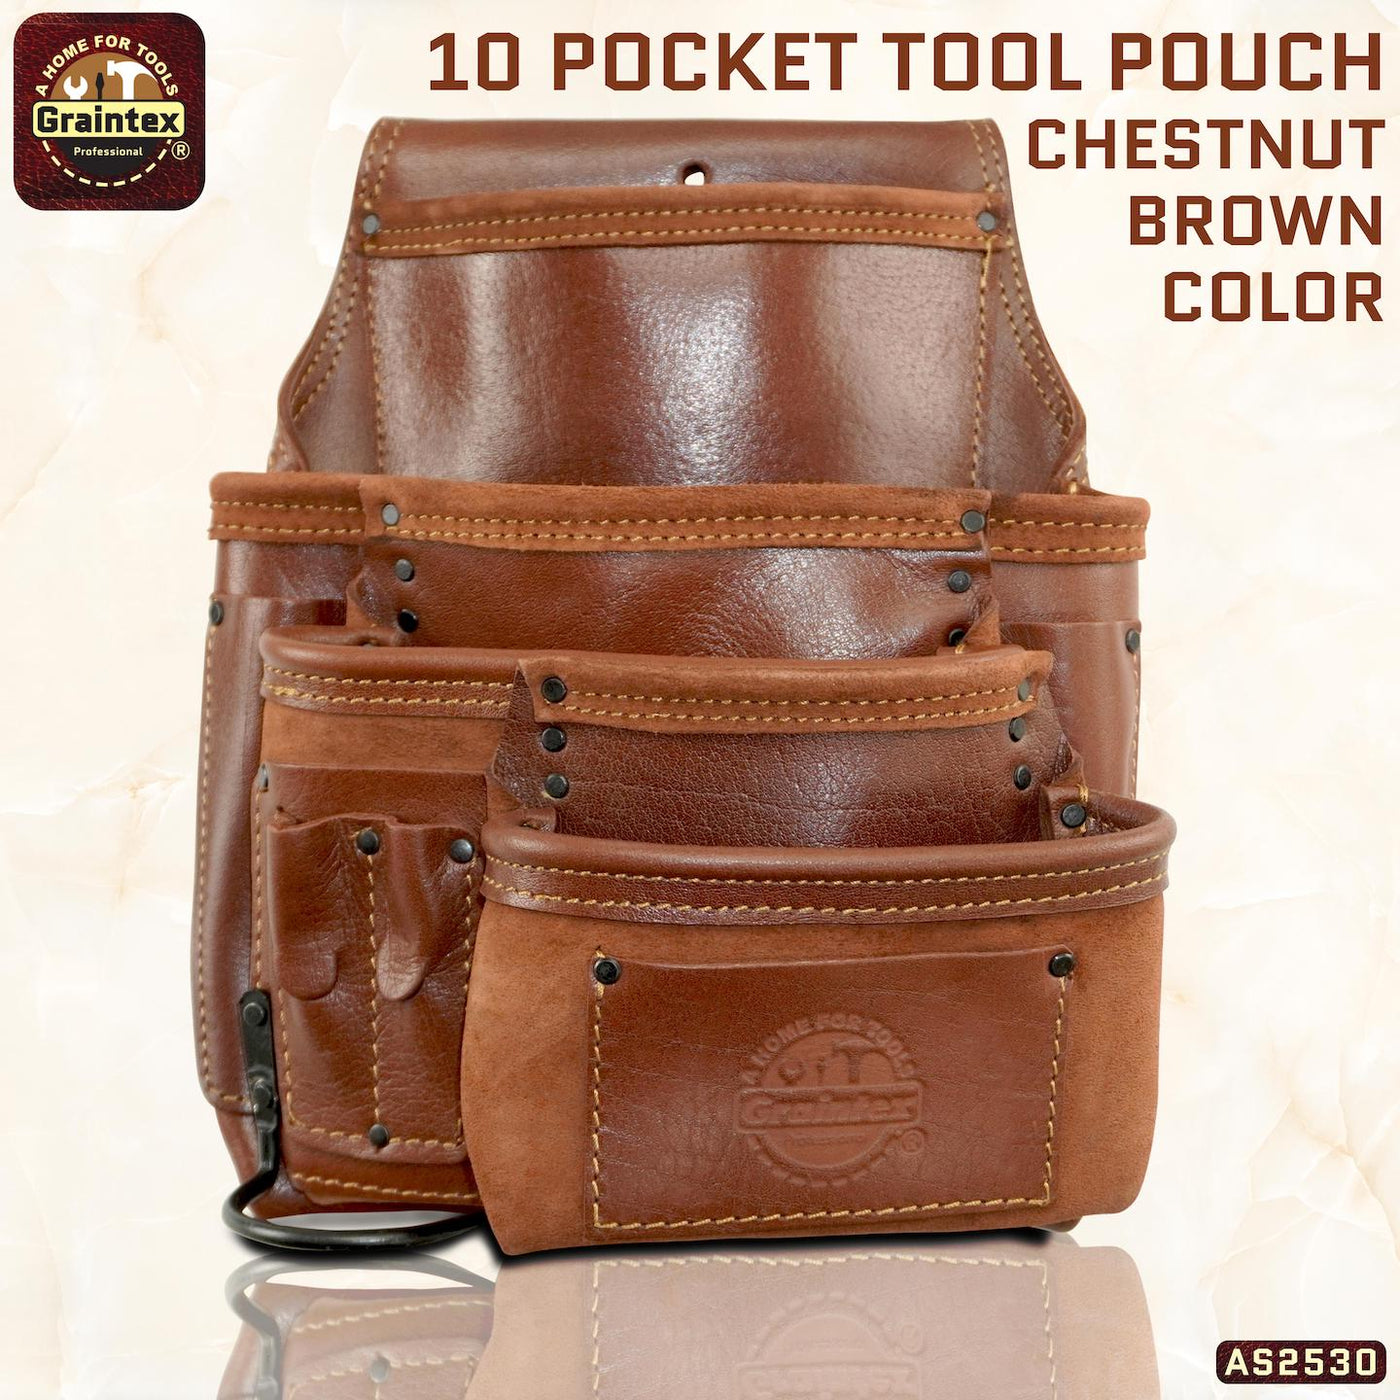 AS2530 :: 10 Pocket Right Handed Framer’s Tool Pouch Ambassador Series Chestnut Brown Color Top Grain Leather